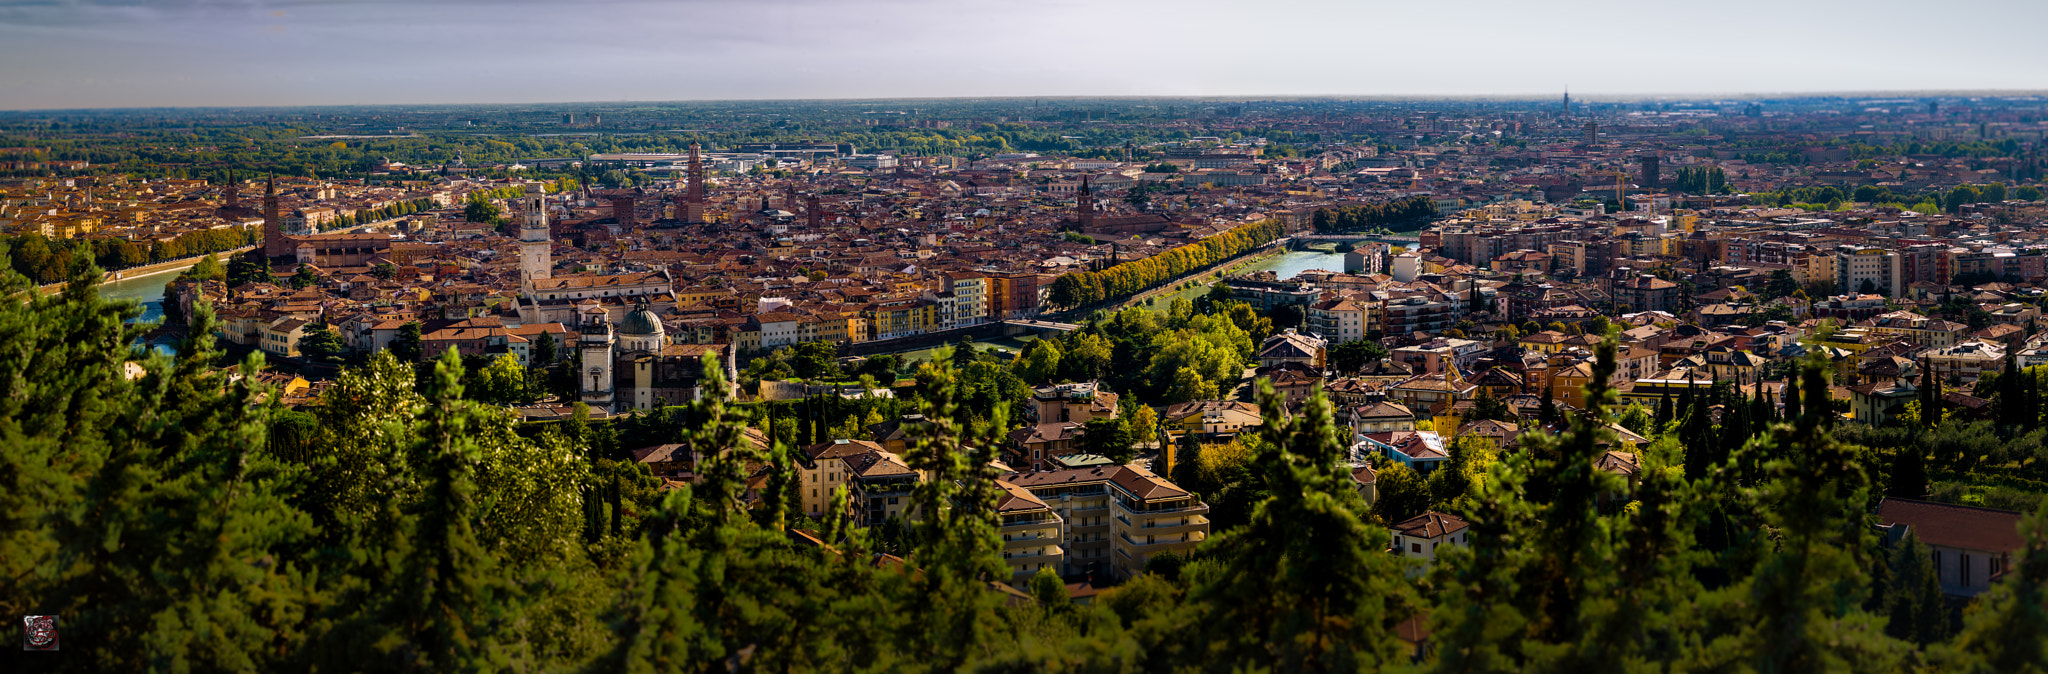 Leica APO-Summicron-M 90mm F2 ASPH sample photo. North italy: verona on the river adige - get an overview photography